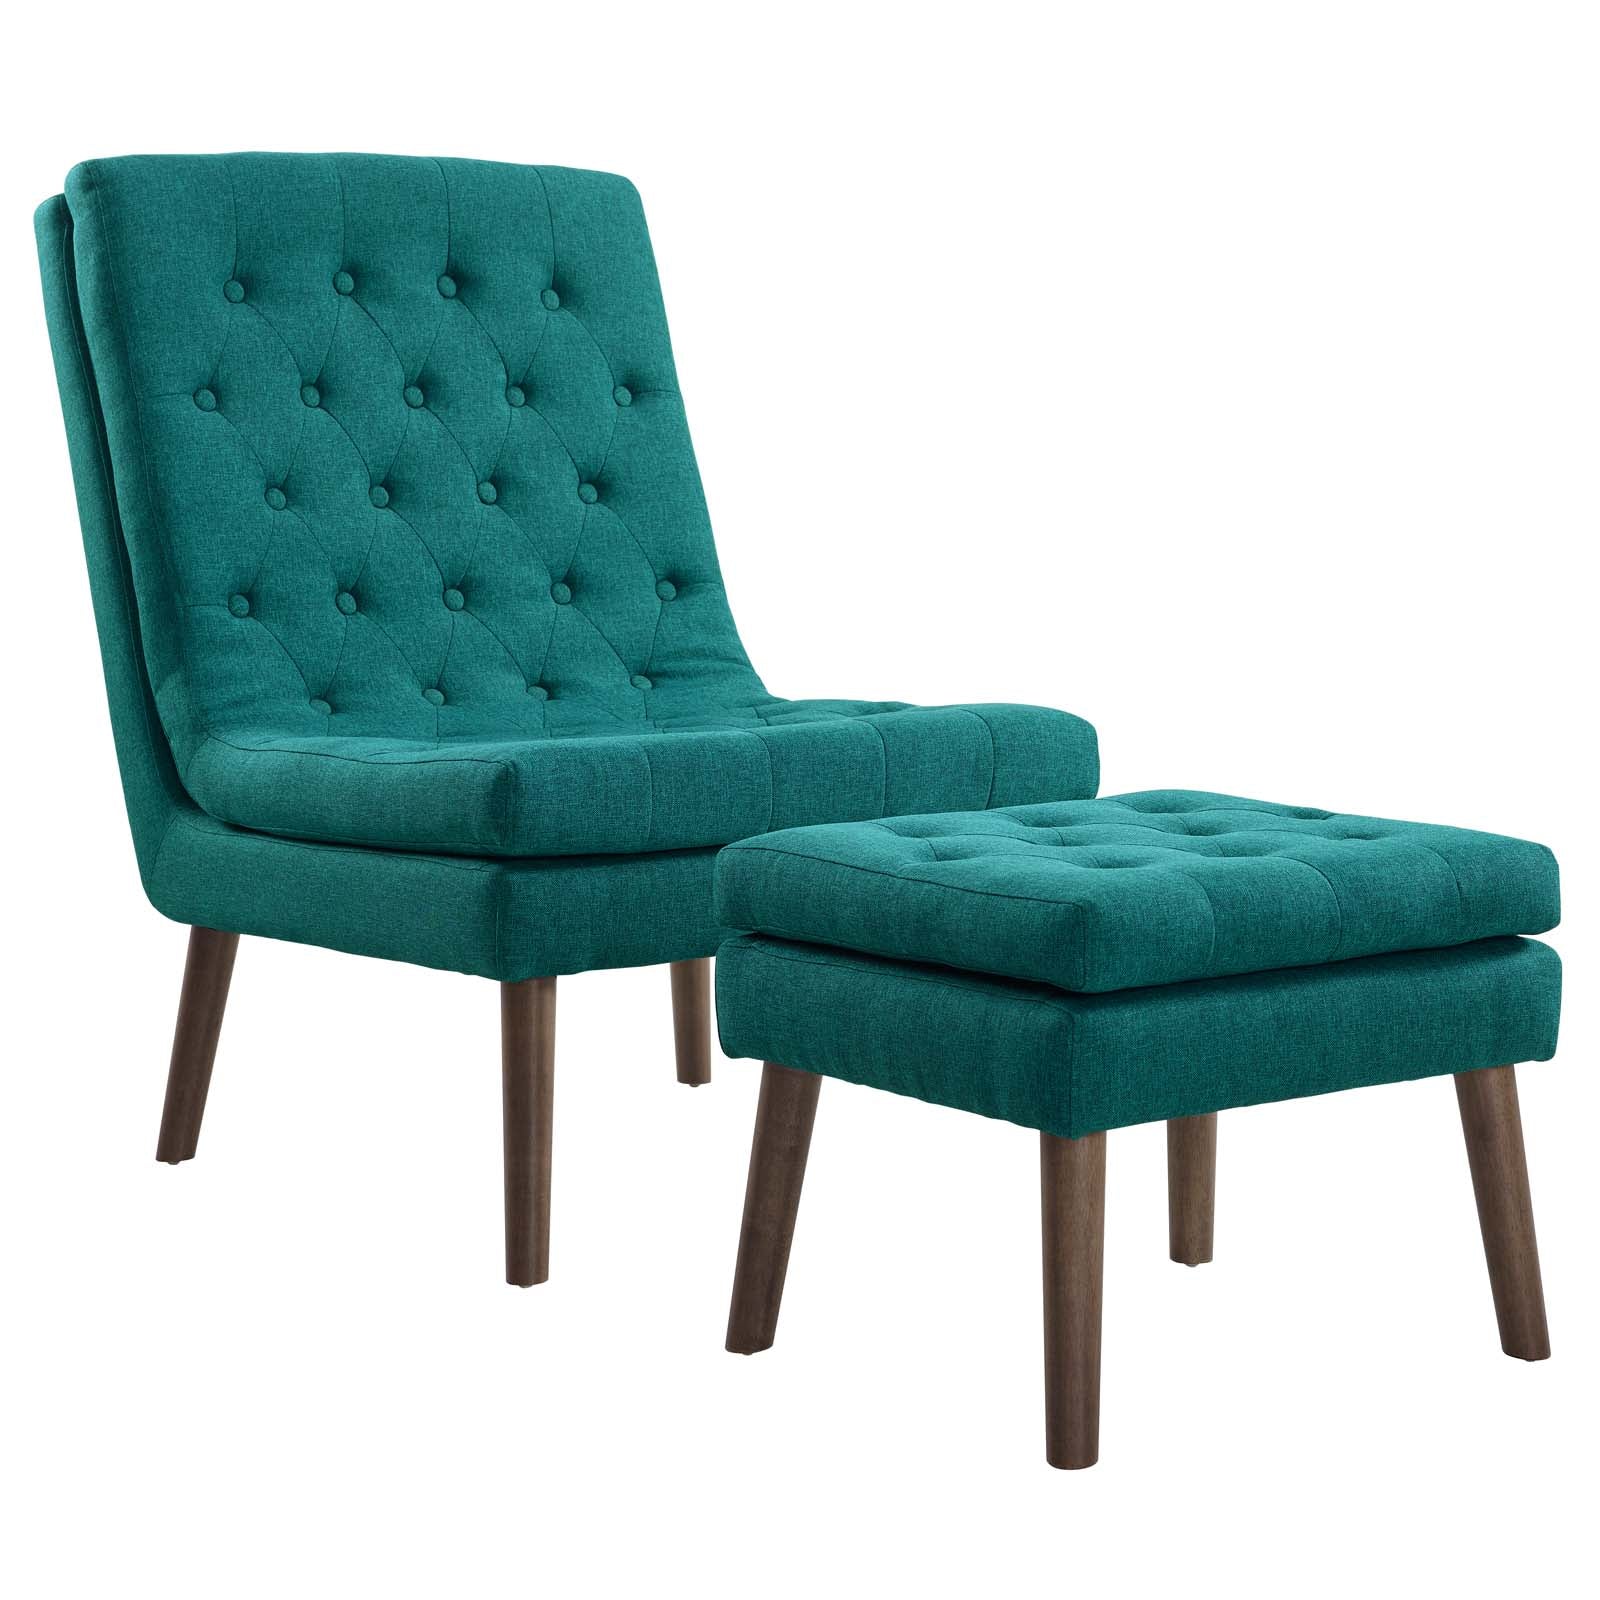 Modify Upholstered Lounge Chair and Ottoman - East Shore Modern Home Furnishings